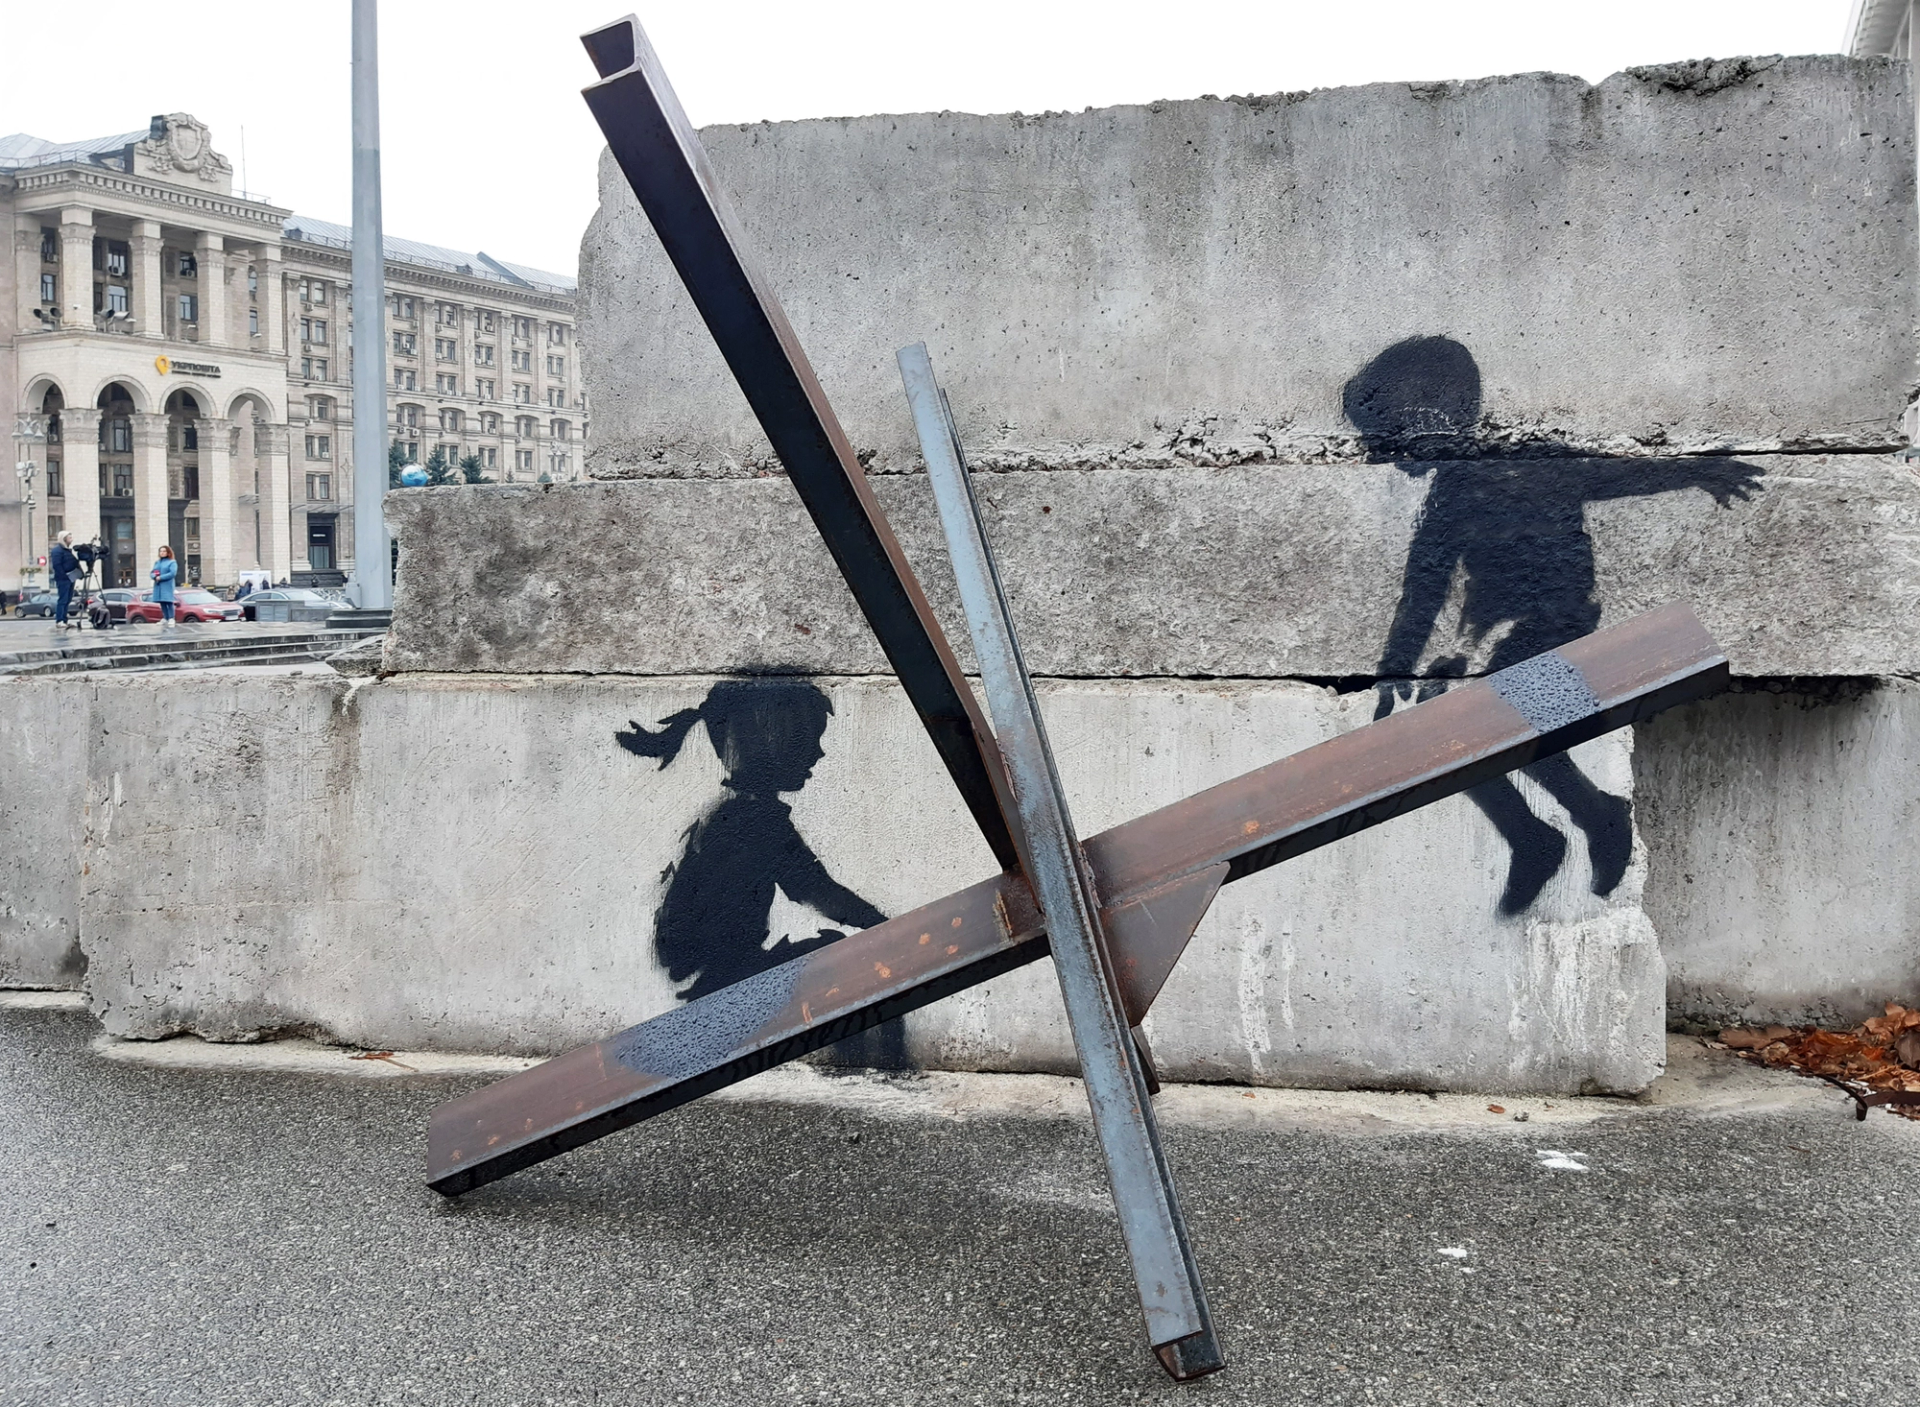 From Bristol to Bethlehem: Mapping Banksy's Artistic Interventions Across the Globe